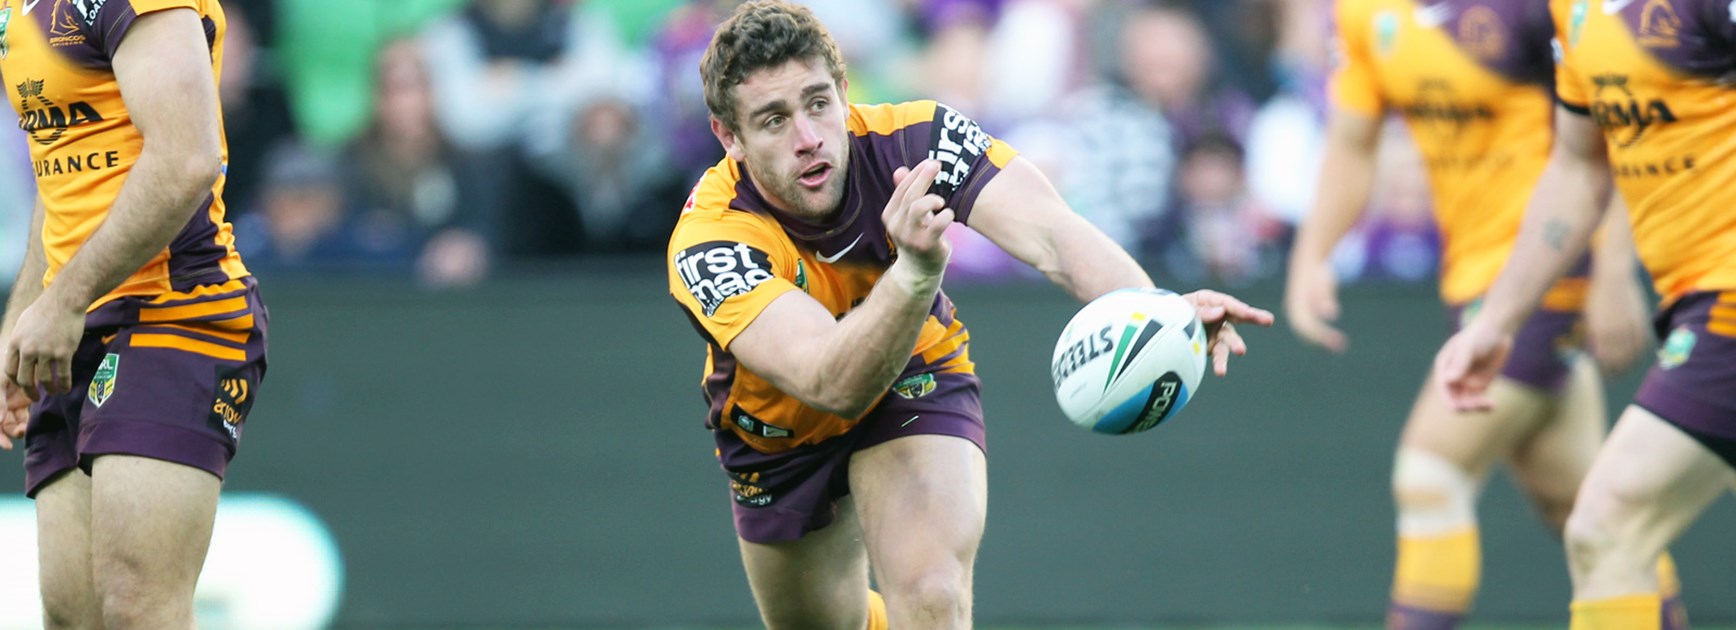 Broncos hooker Andrew McCullough made 64 tackles in his side's Round 15 win over the Storm.